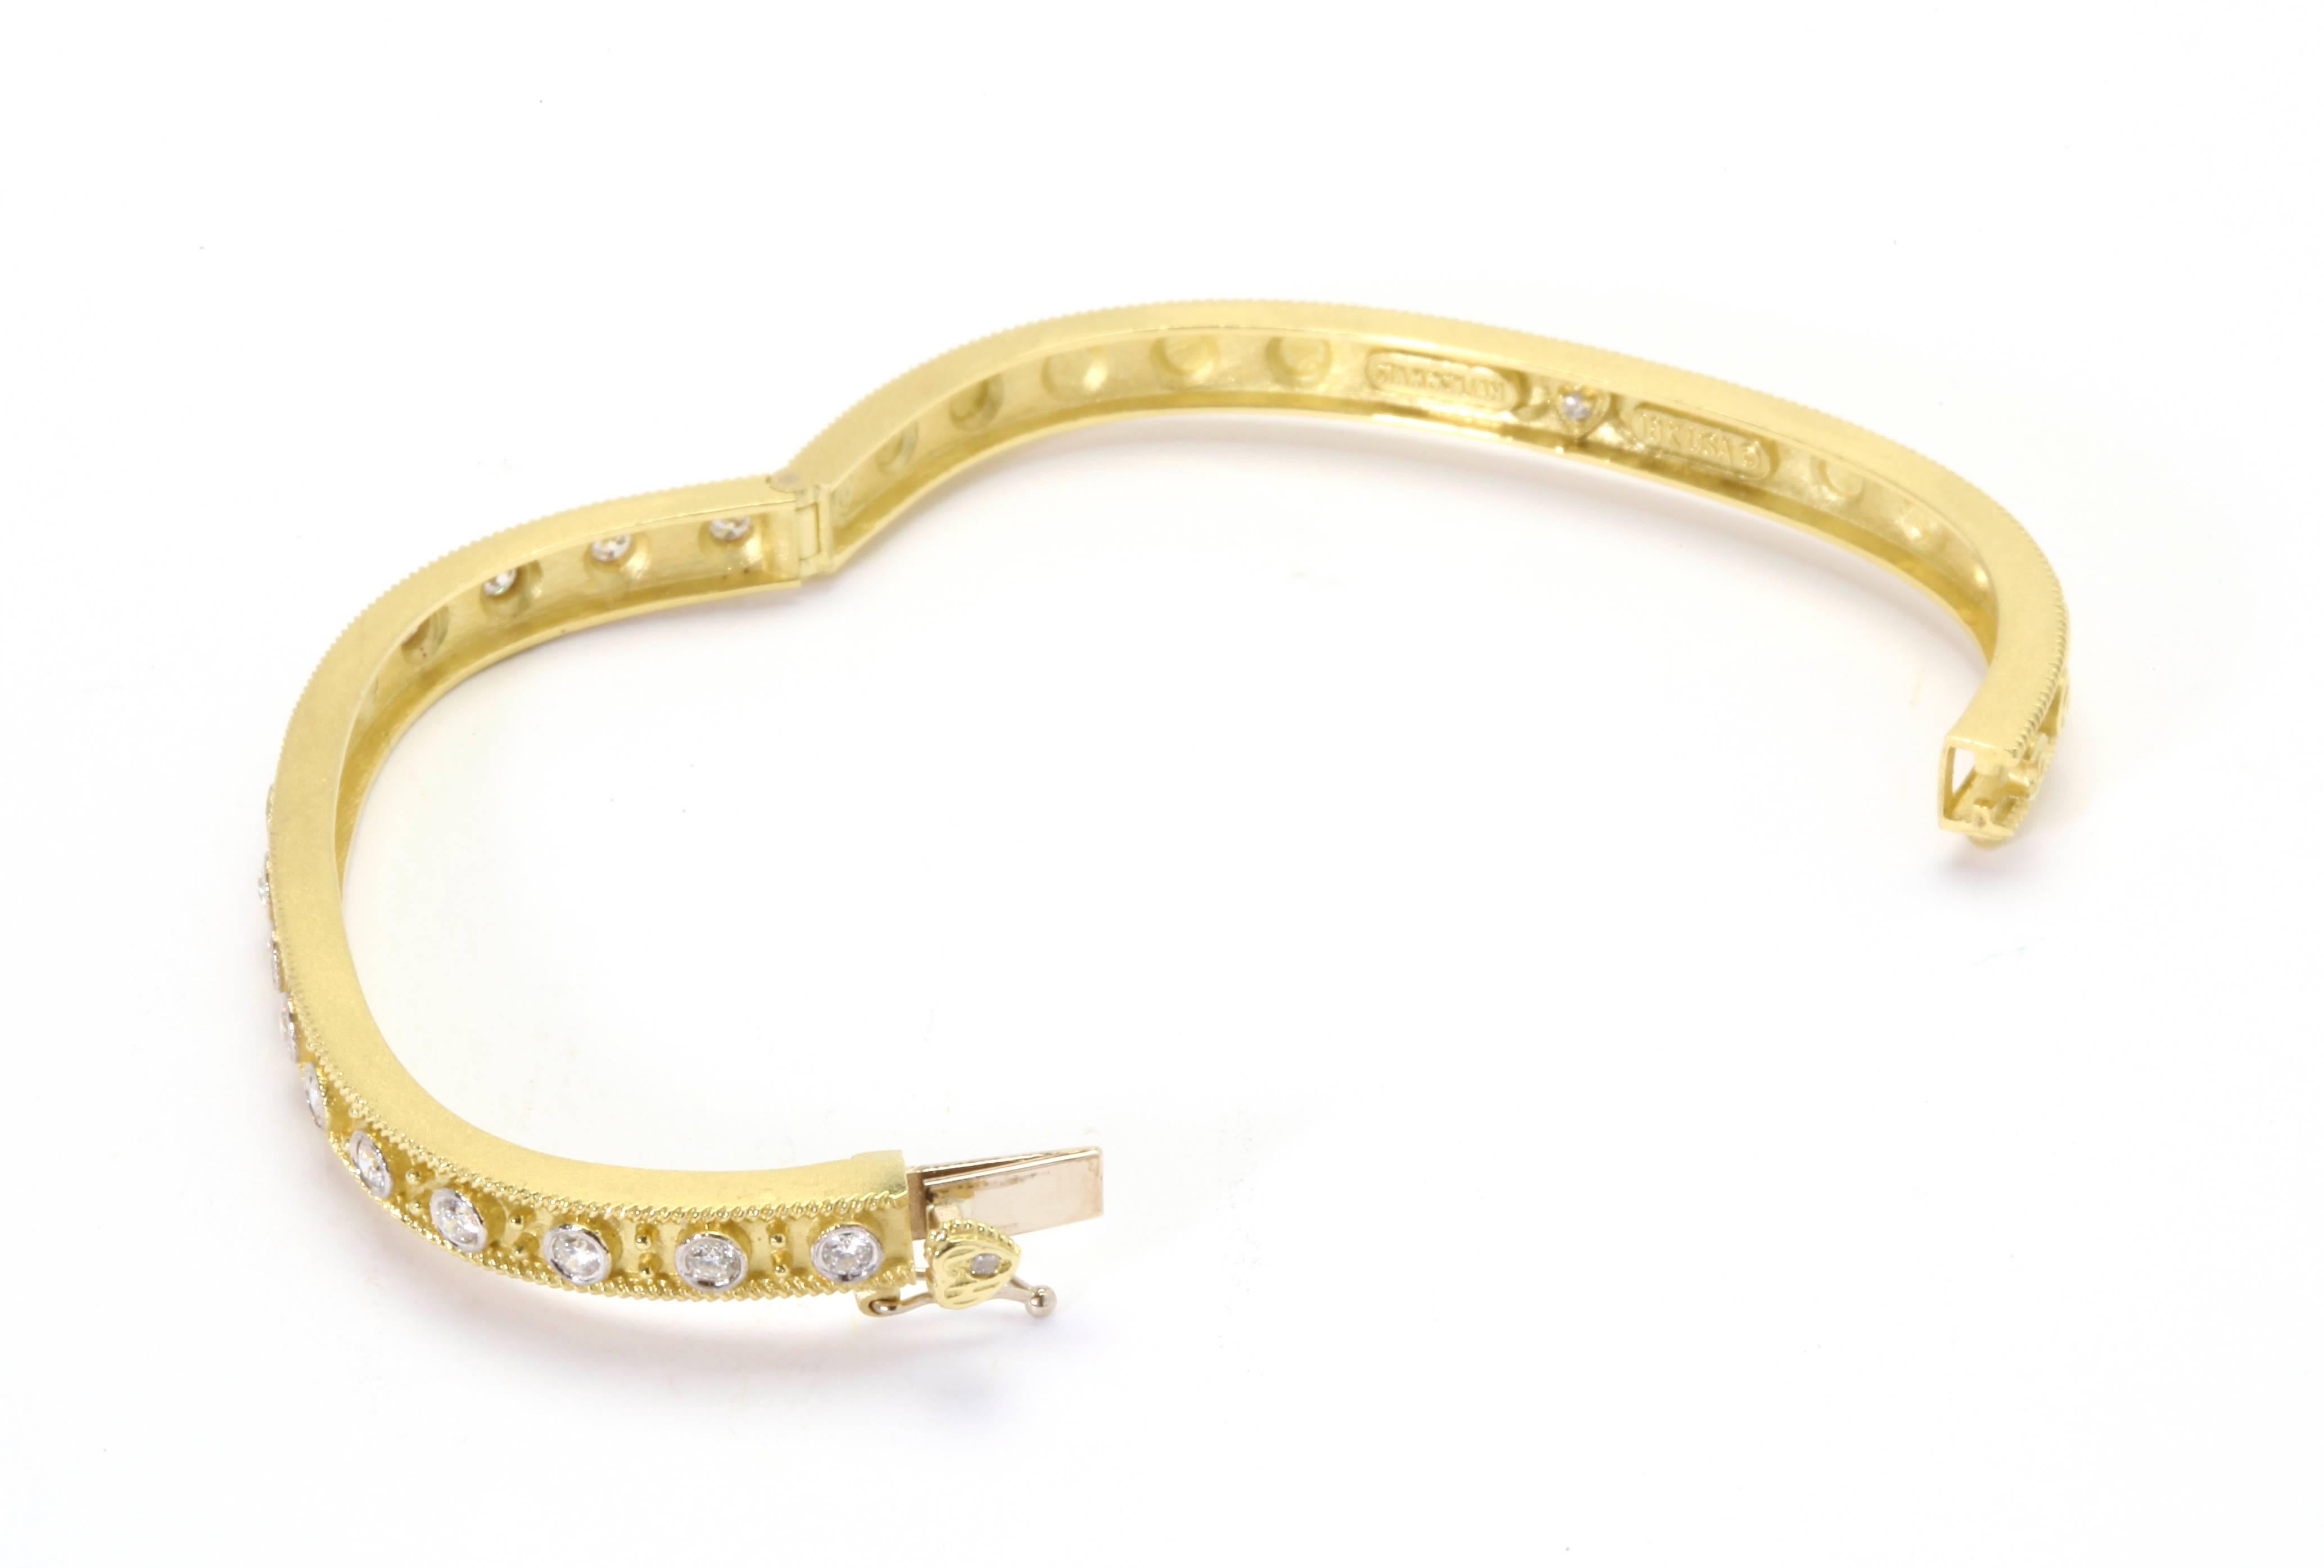 IF YOU ARE REALLY INTERESTED, CONTACT US WITH ANY REASONABLE OFFER. WE WILL TRY OUR BEST TO MAKE YOU HAPPY!

18K Yellow Gold and Diamond Bangle Bracelet by Stambolian

16 Diamonds total, 0.82 carat G color, VS clarity diamonds

Size 7

Push button